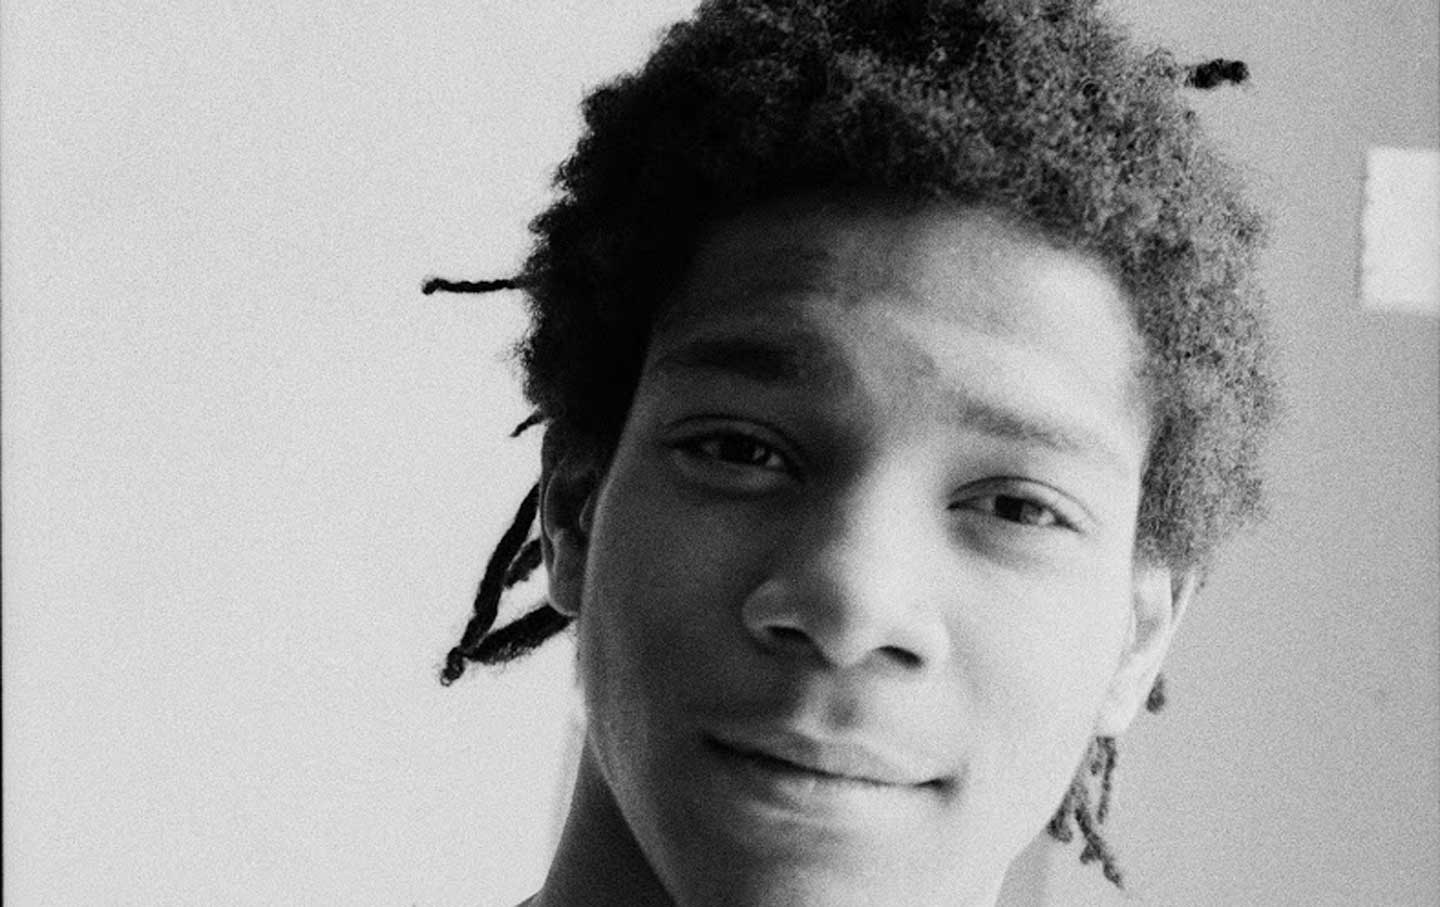 The Presence and Absence of Basquiat